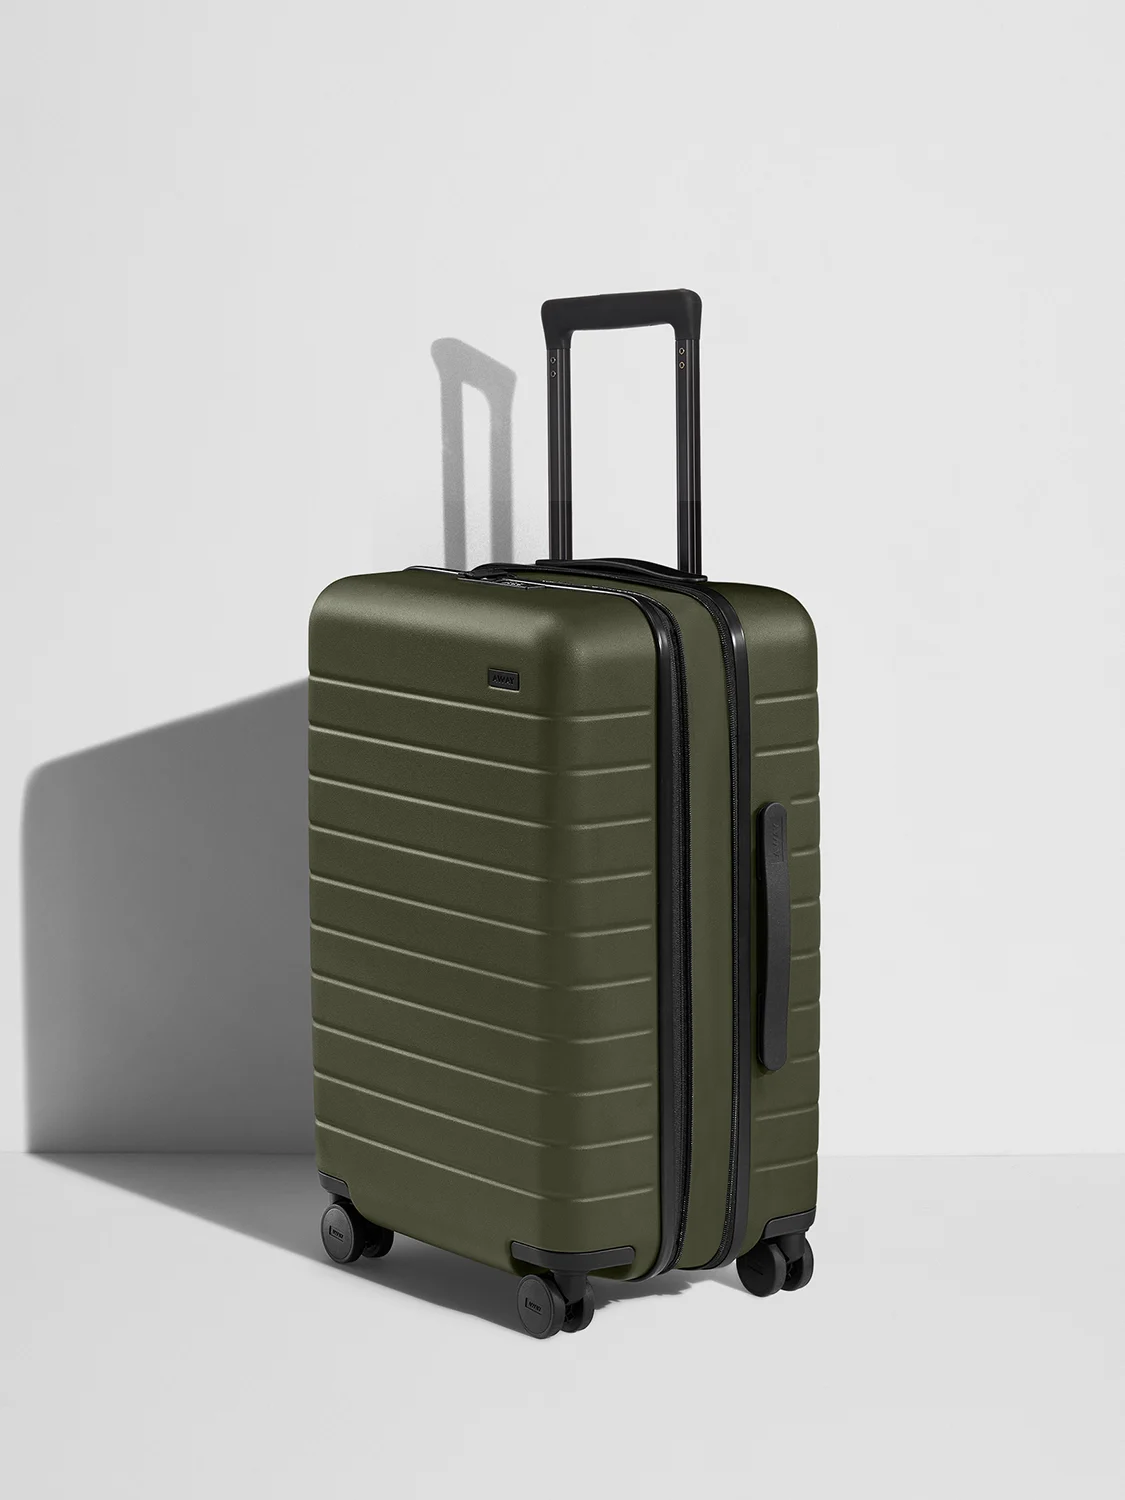 airport travel design luggage buy